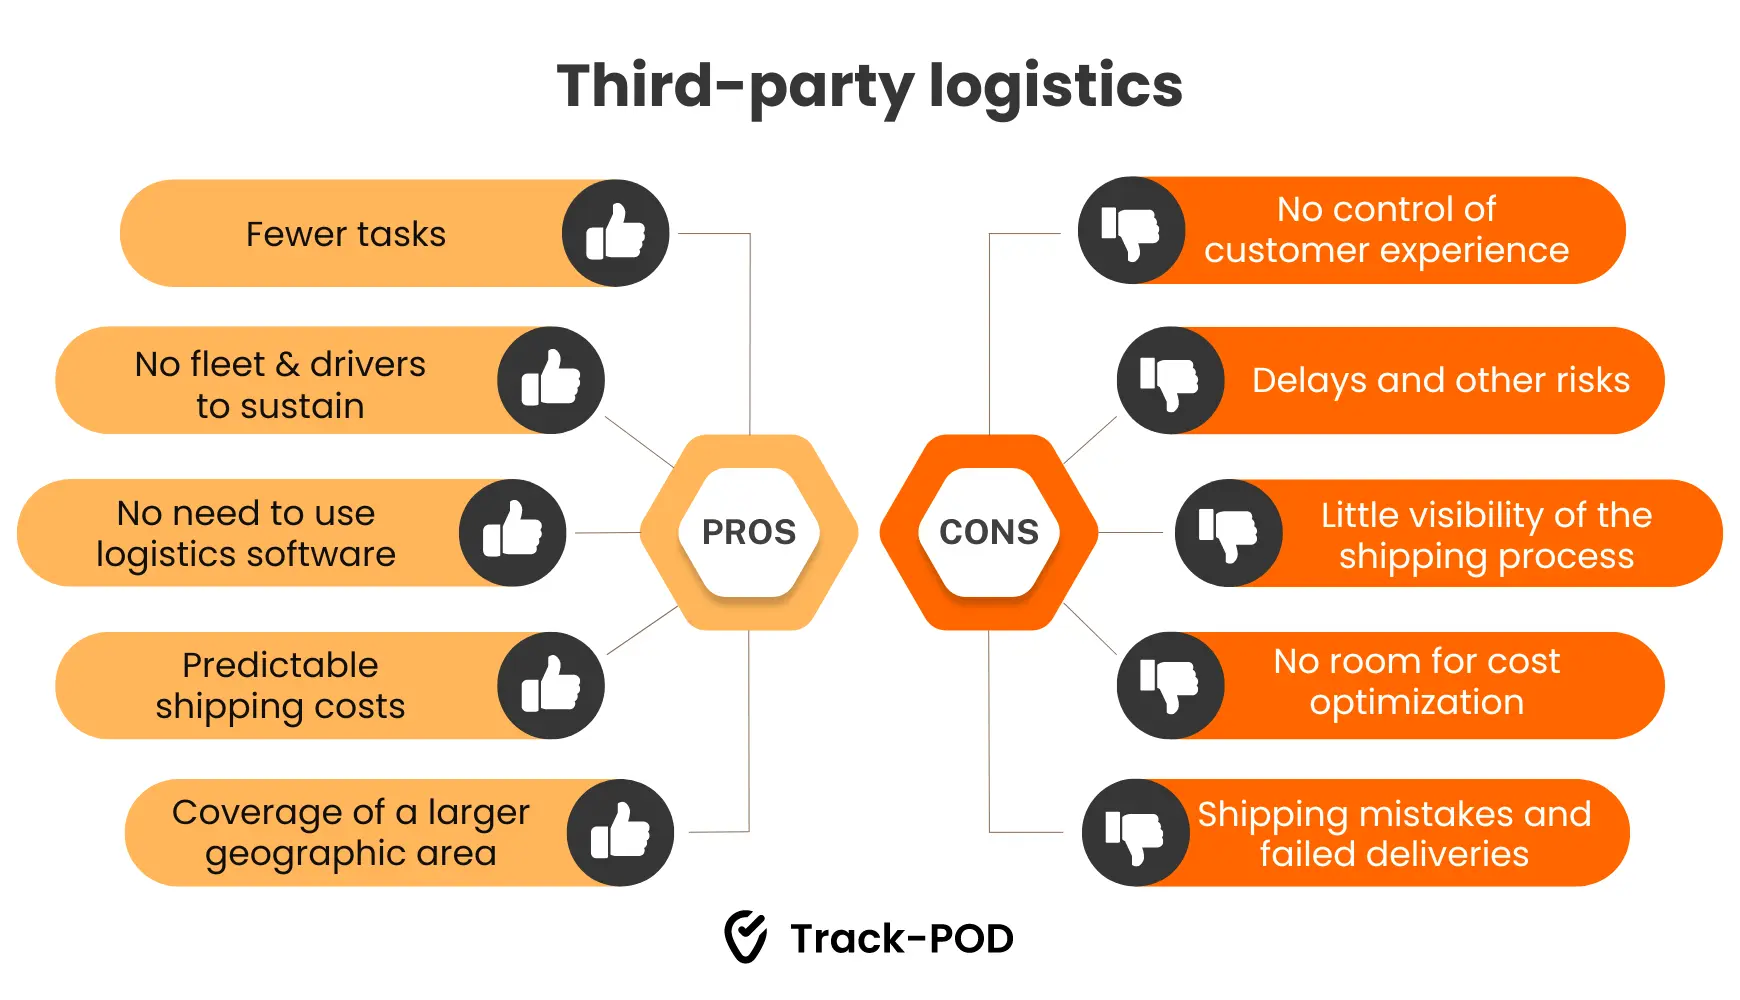 Pros and cons of third-party logistics